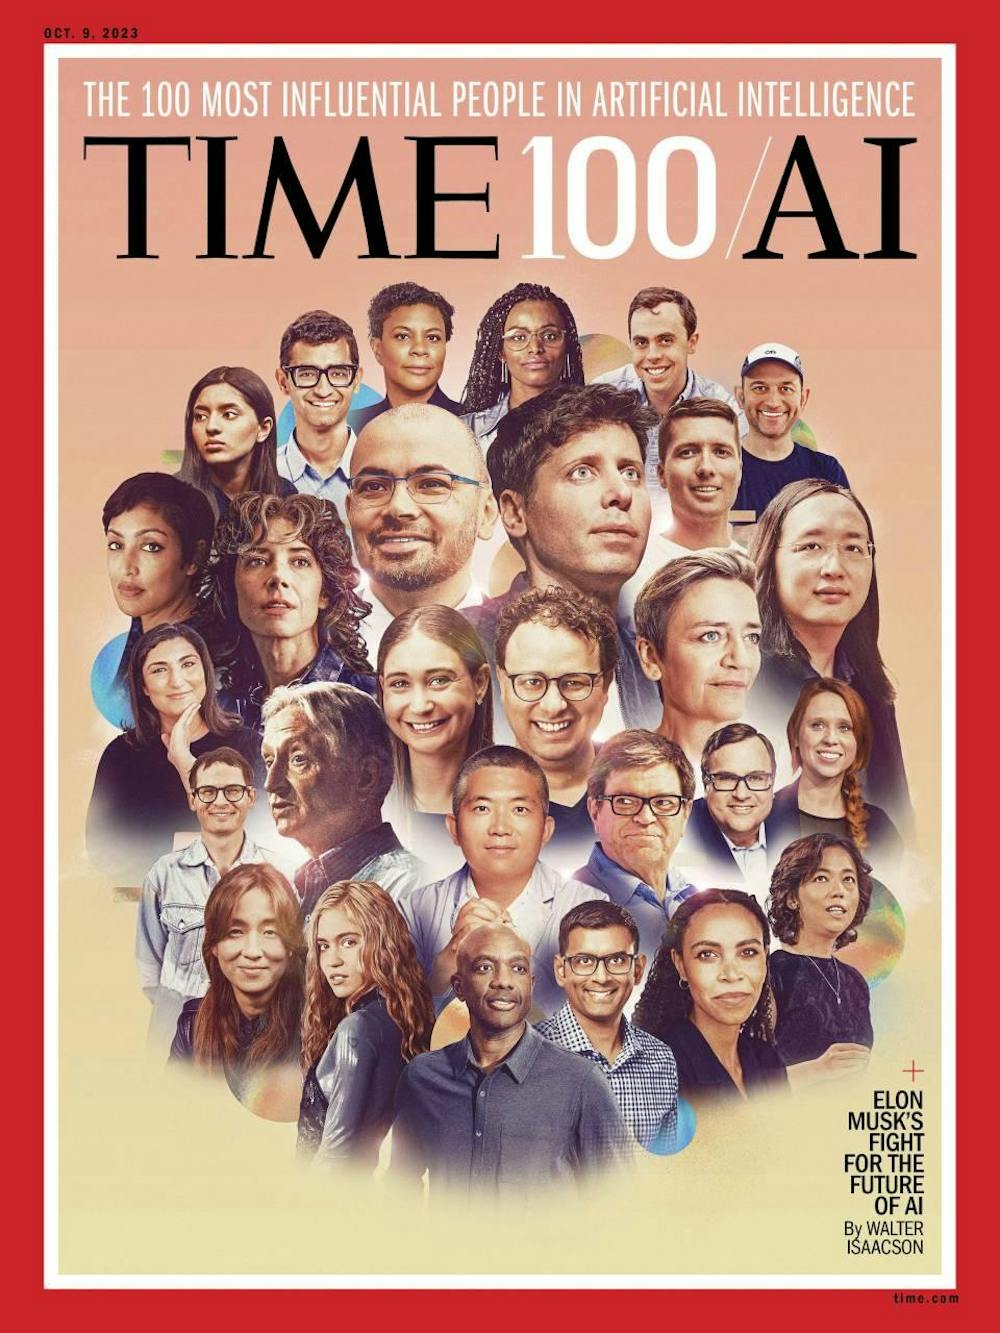 The photo features headshots of all 100 members of TIME100's most influential people in artificial intelligence